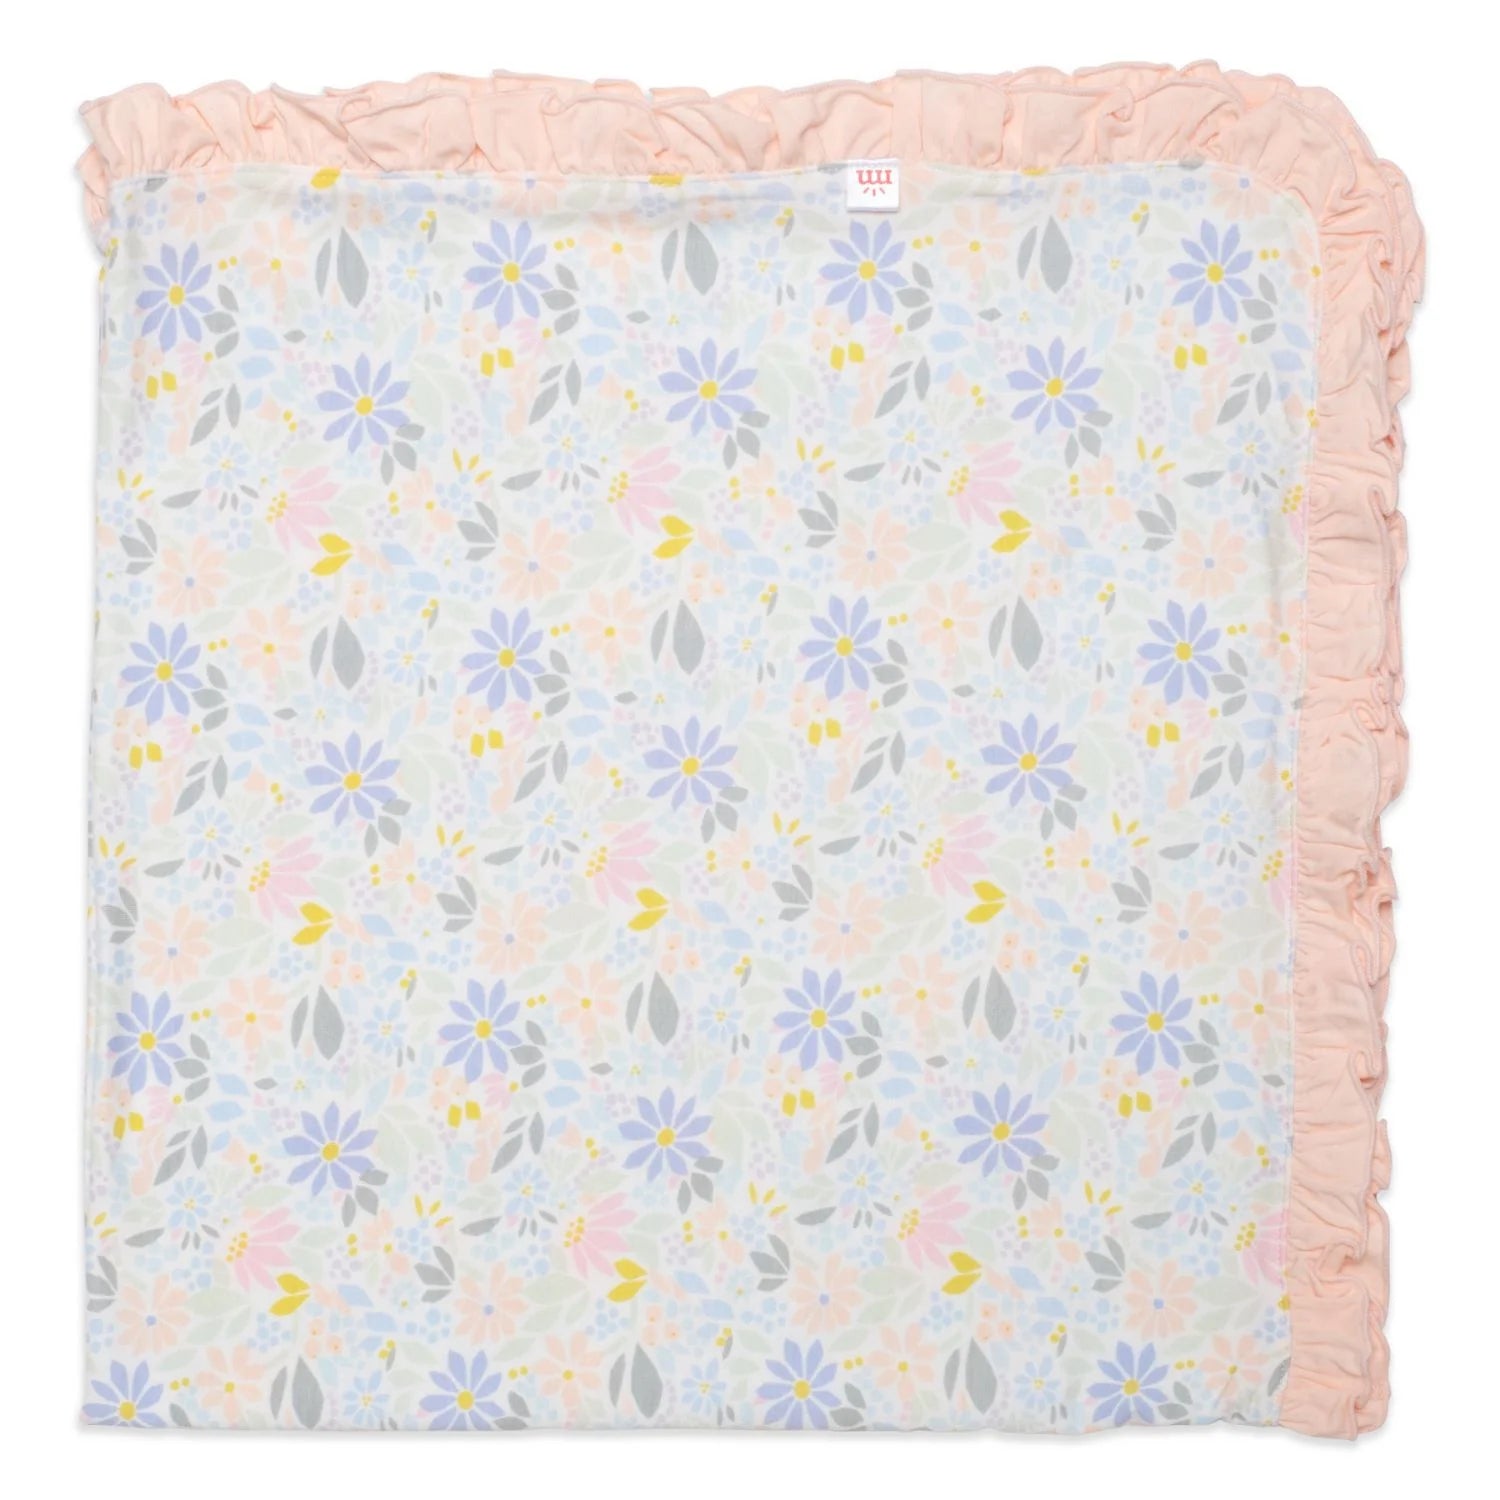 Darby Modal Ruffle Baby Blanket  - Doodlebug's Children's Boutique